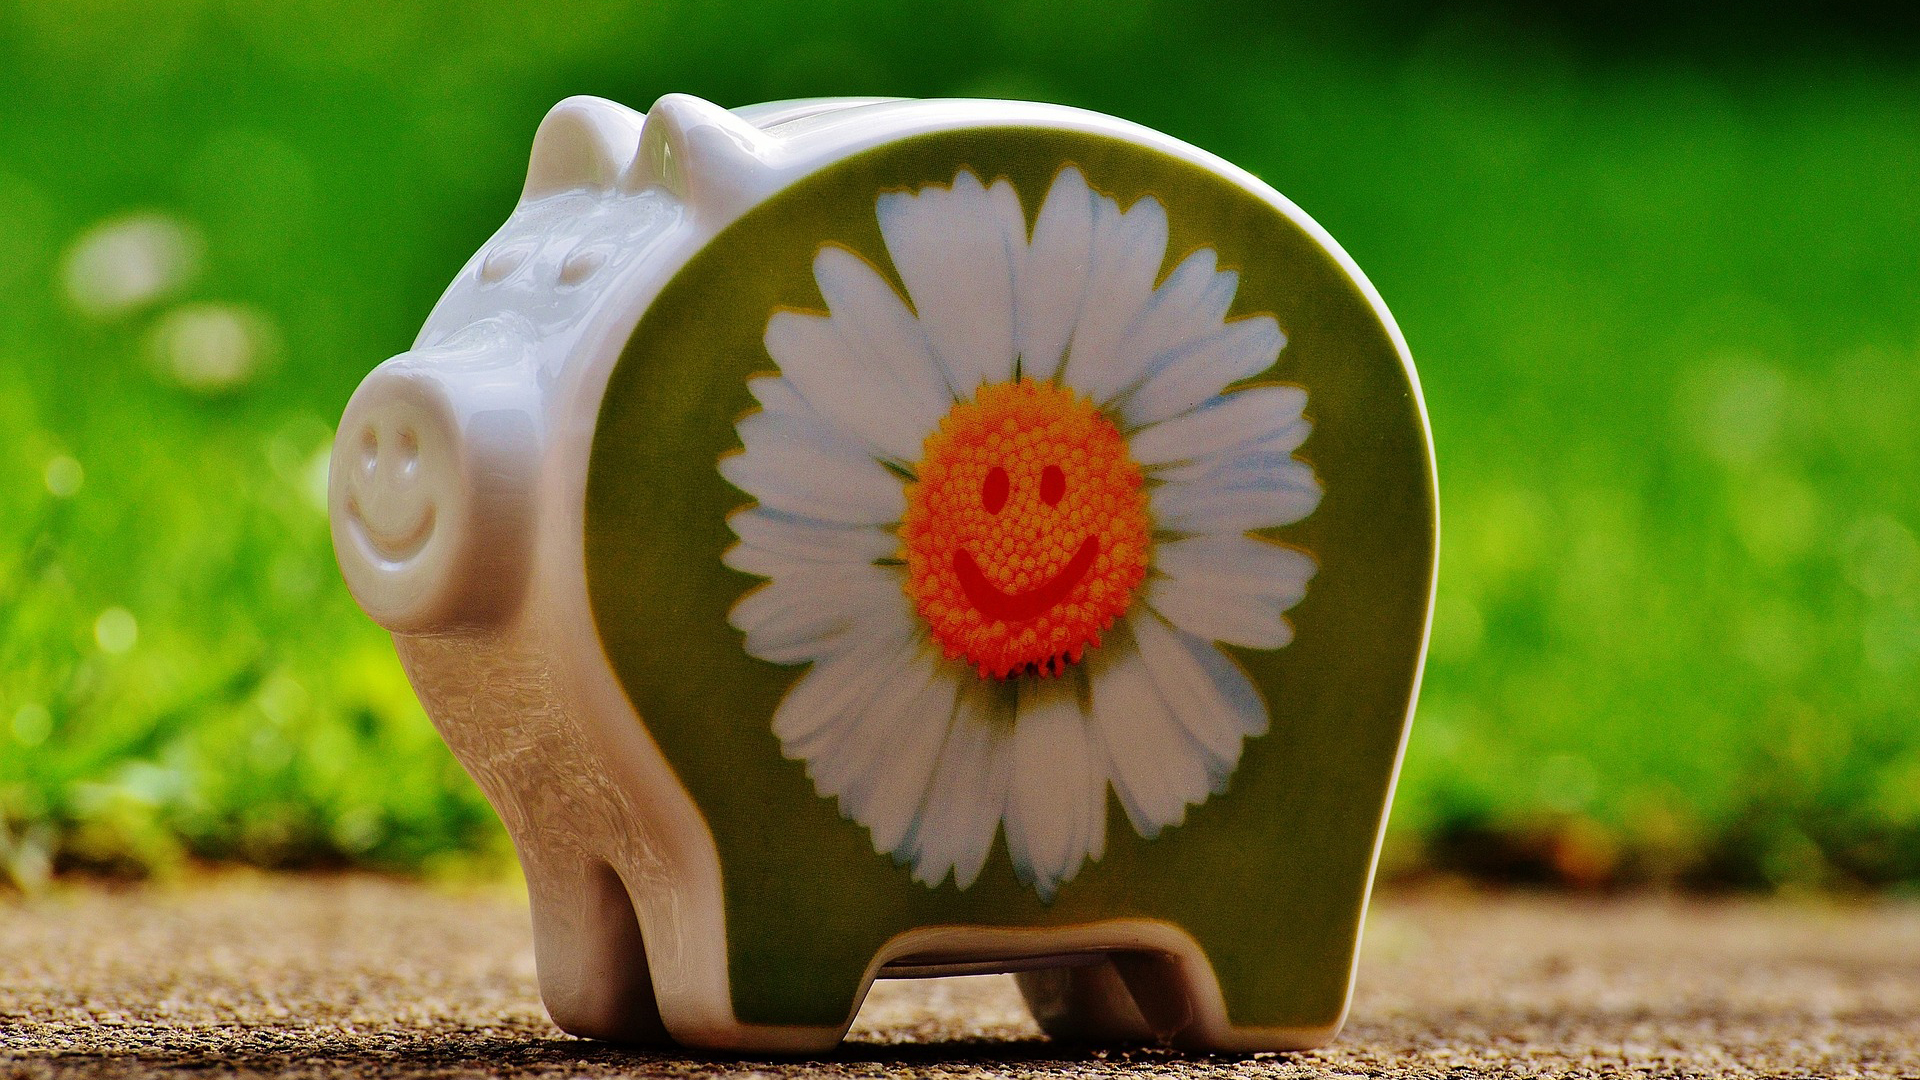 A piggy bank with a flower painted on it